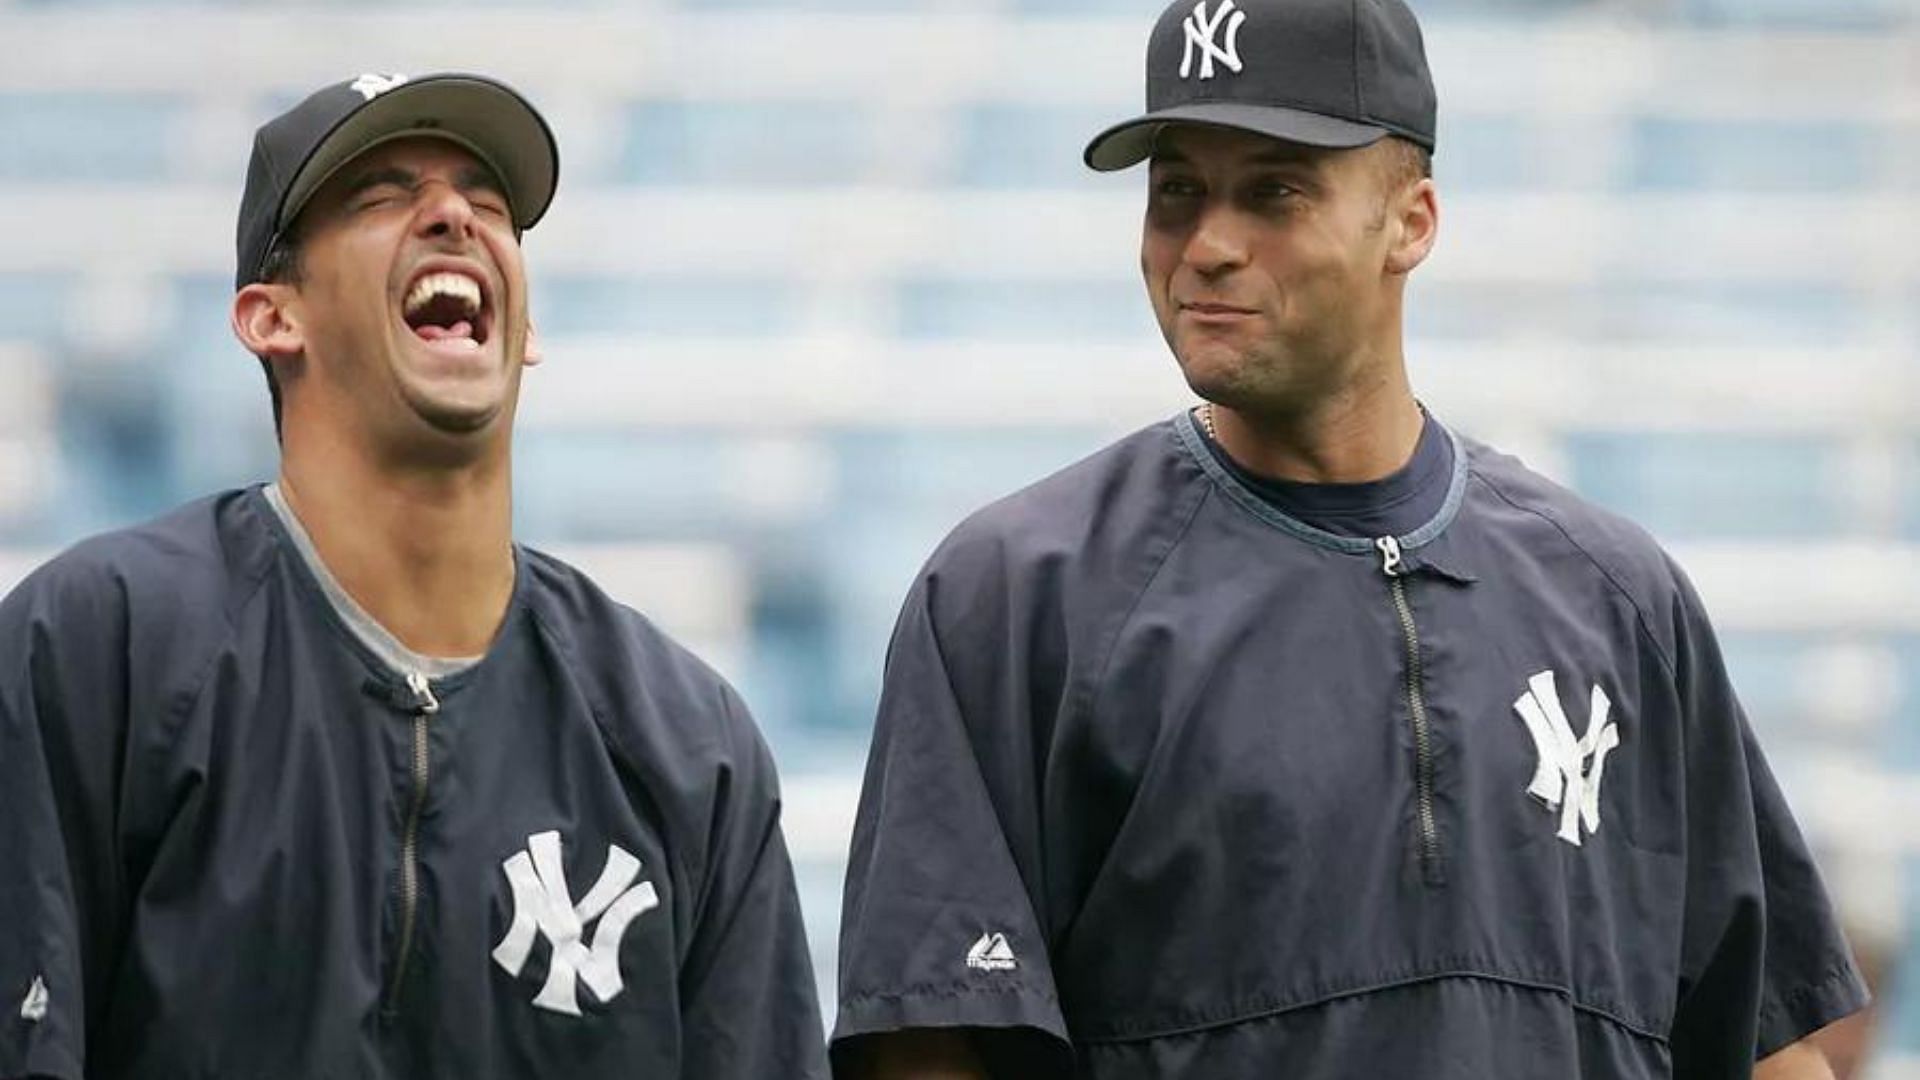 You really didn't see one of us without the other - Yankees